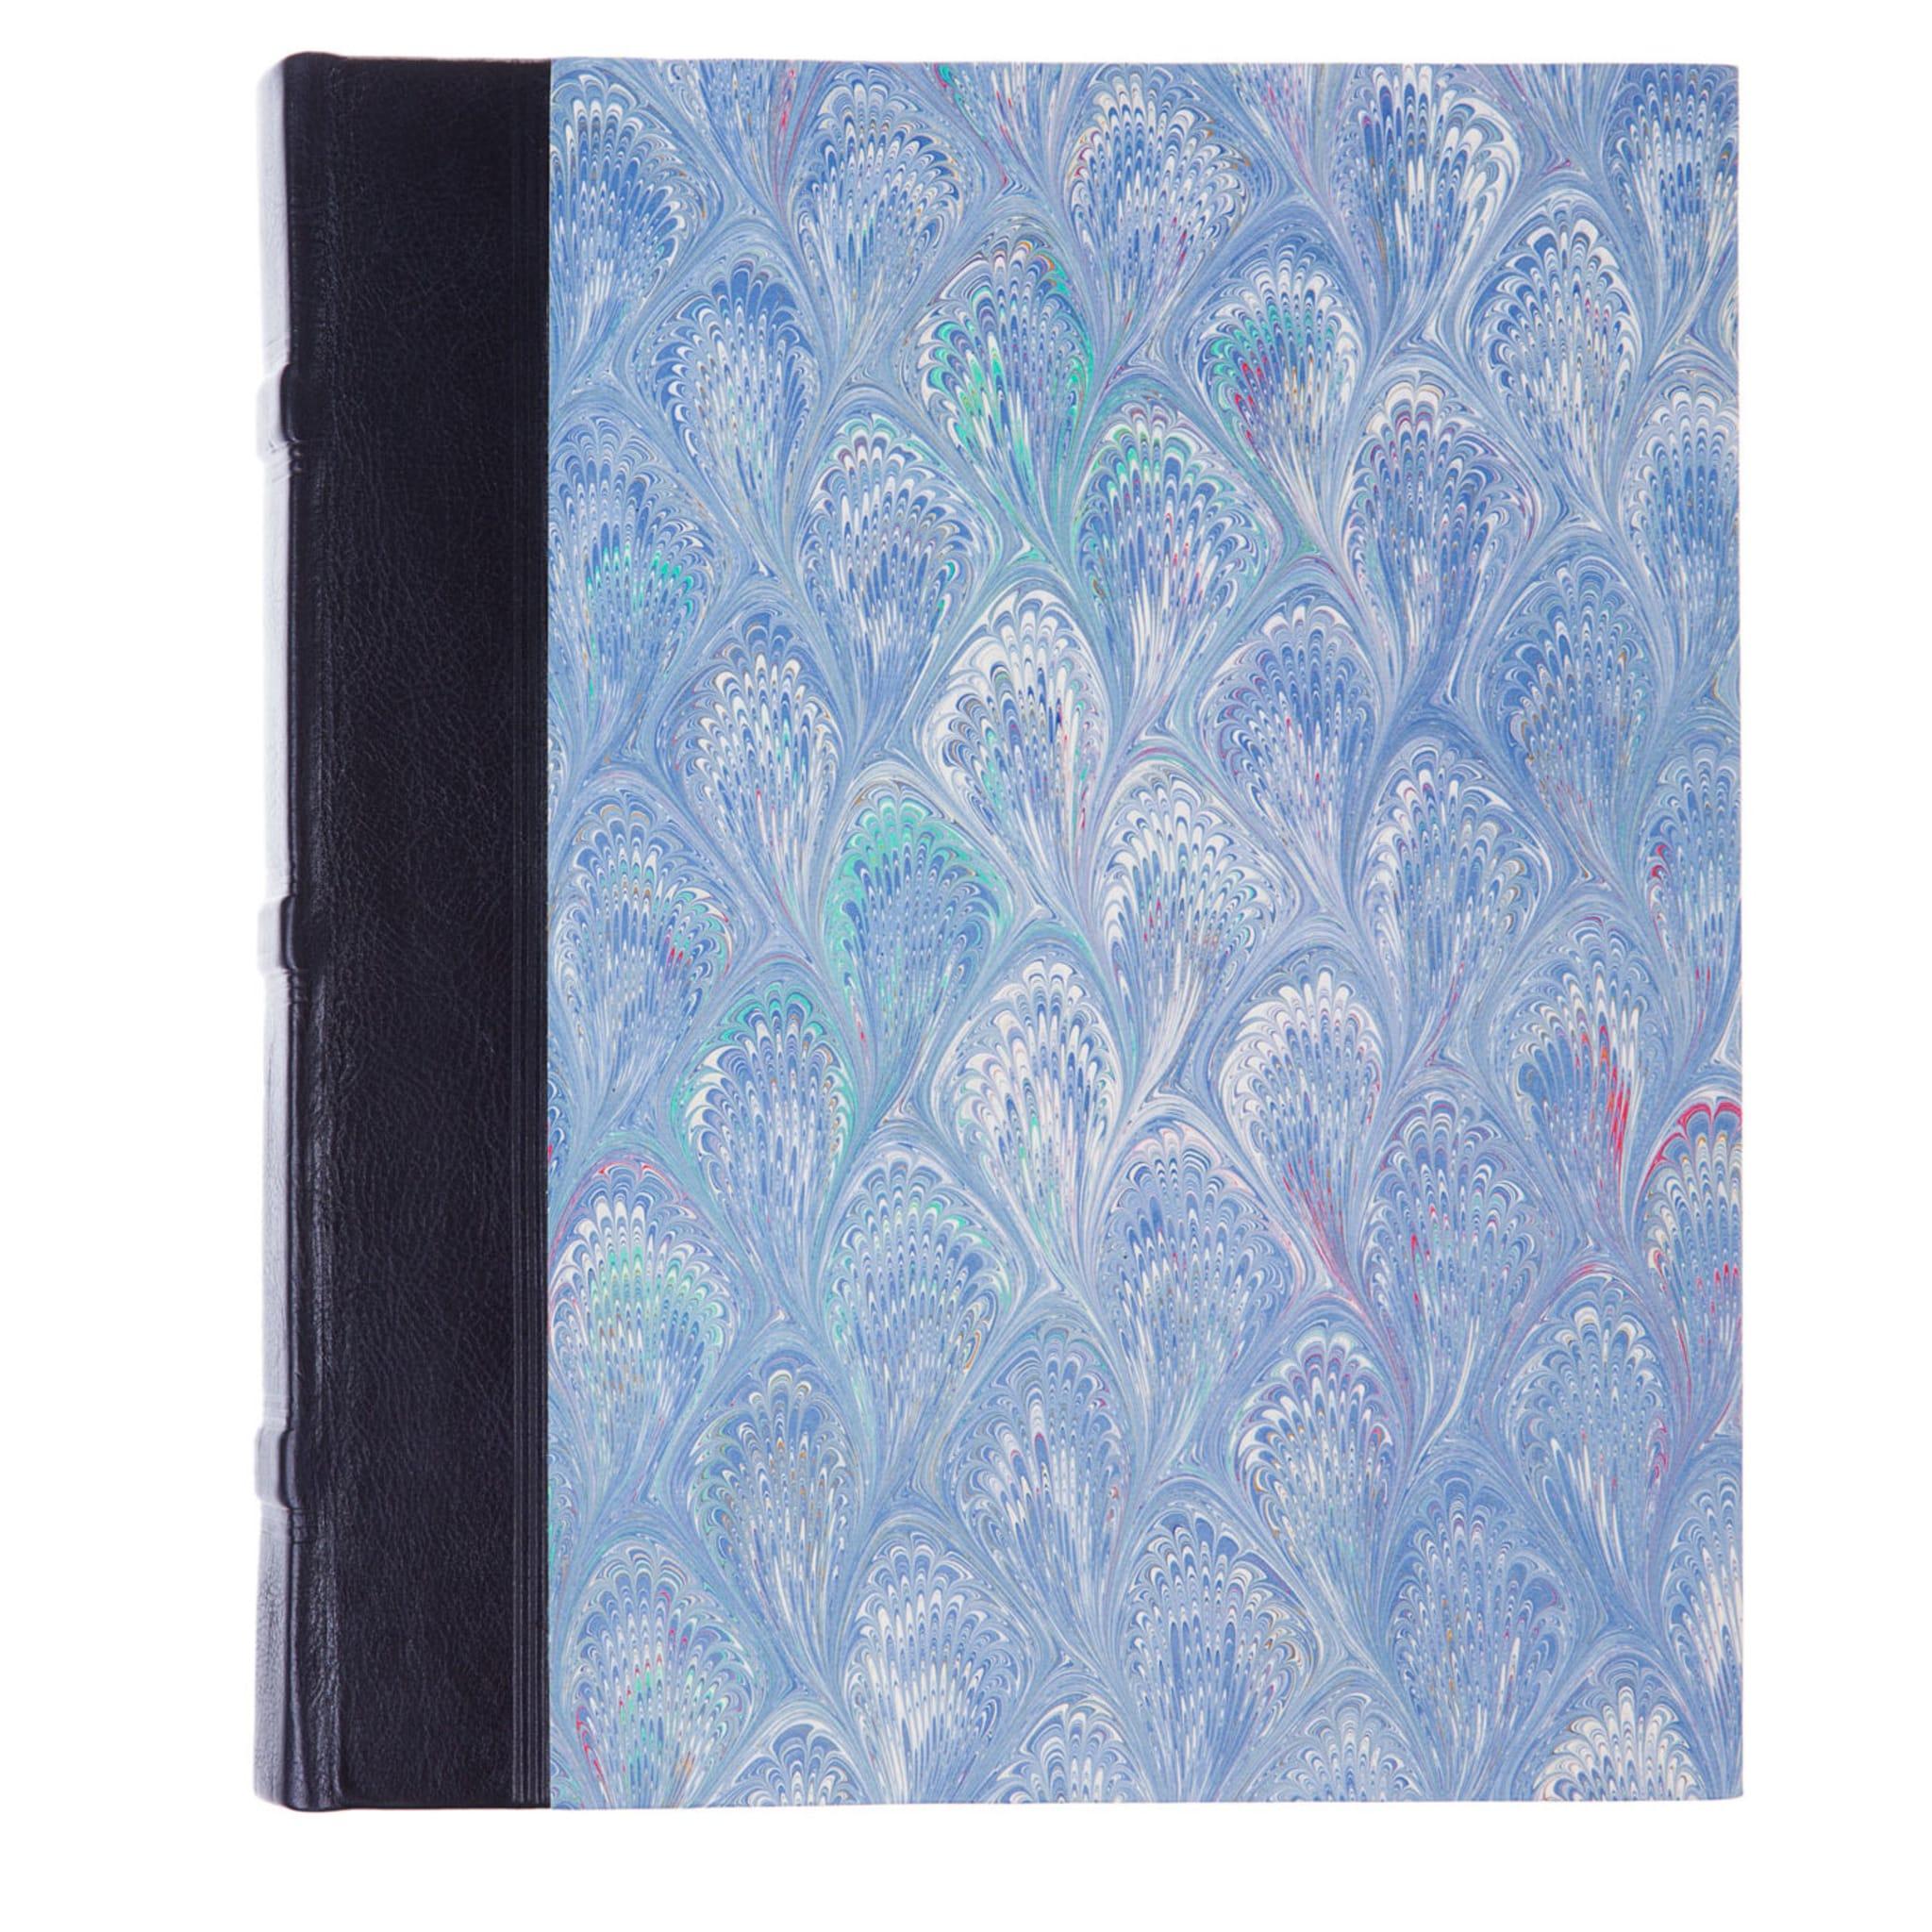 Handmade photo album by Florentine bookbinder Florentine Giannini with a leather spine in blue and gorgeous marbled paper cover in different light blue shades. It contains 30 ivory card sheets to fix photos and is entirely handmade at each phase to